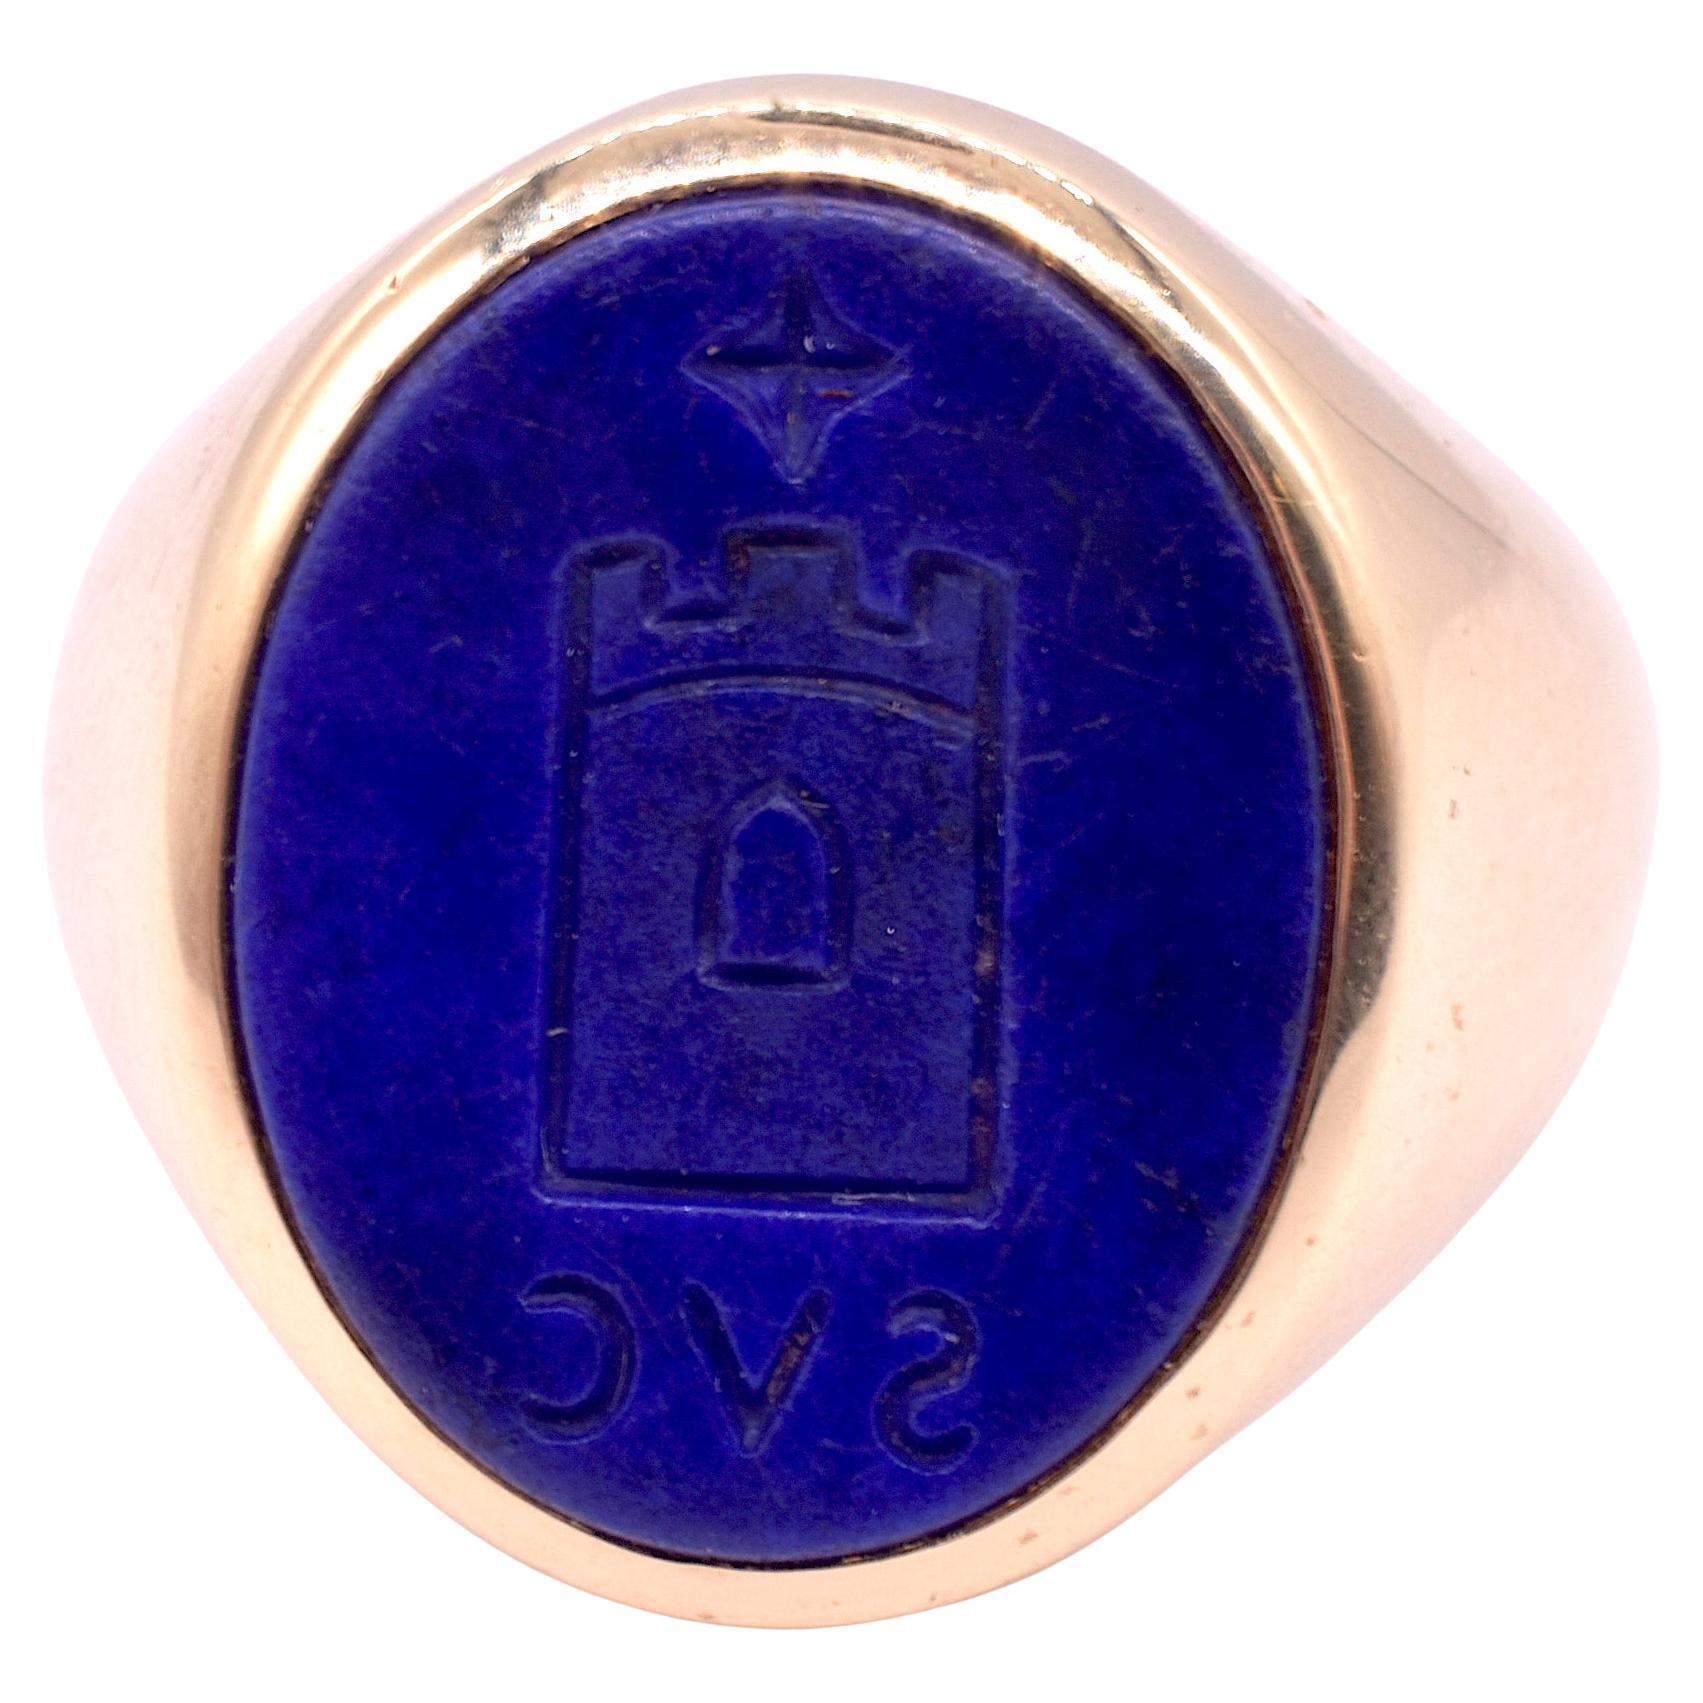 Twentieth Century 14 Karat Blue lapis lazuli signet ring of German or Austrian origin, with initials SVC and a charming intaglio of a stylized castle.  The band has a purity mark of 585 on one side and  a maker's mark on the other. The ring is hand